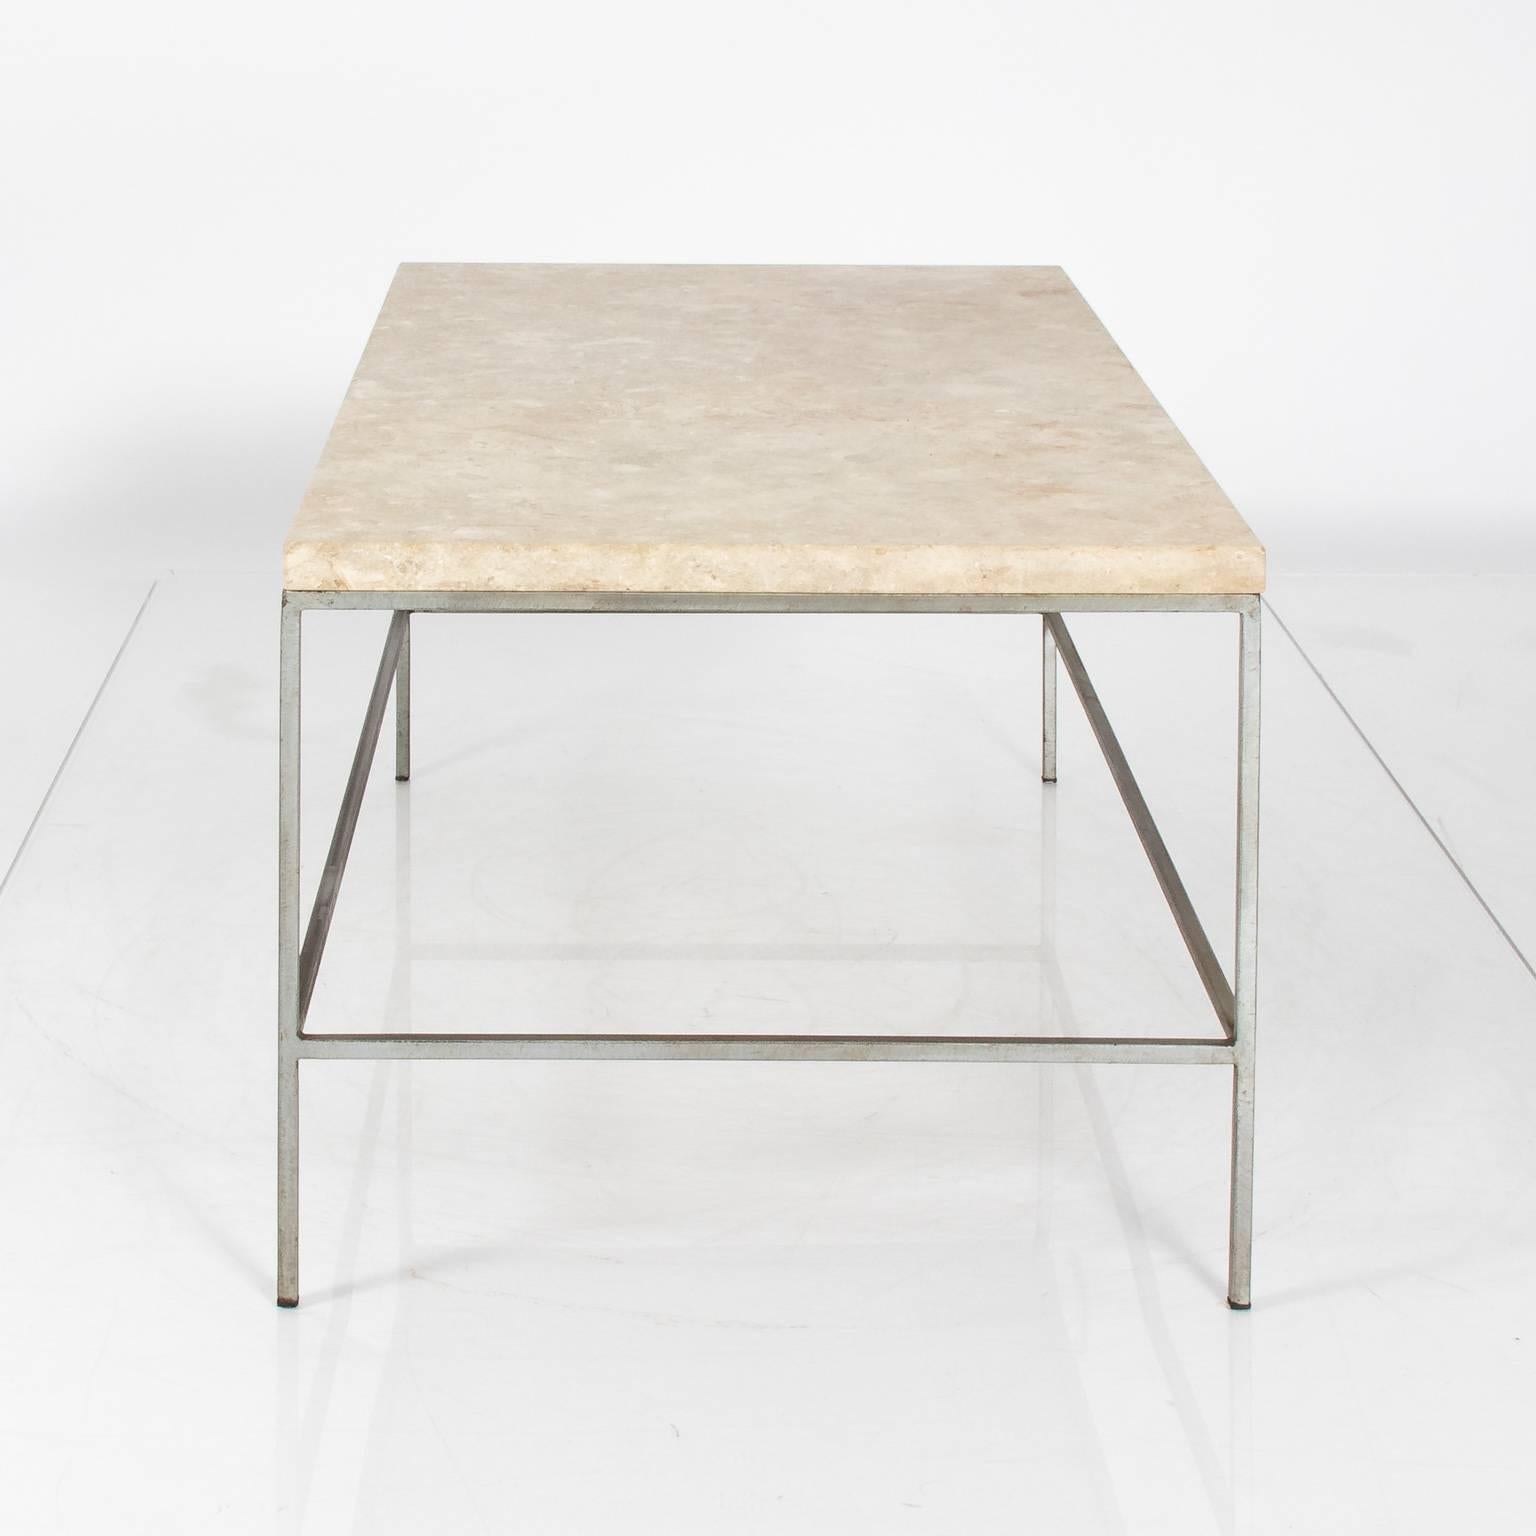 20th Century Midcentury Steel Coffee Table For Sale